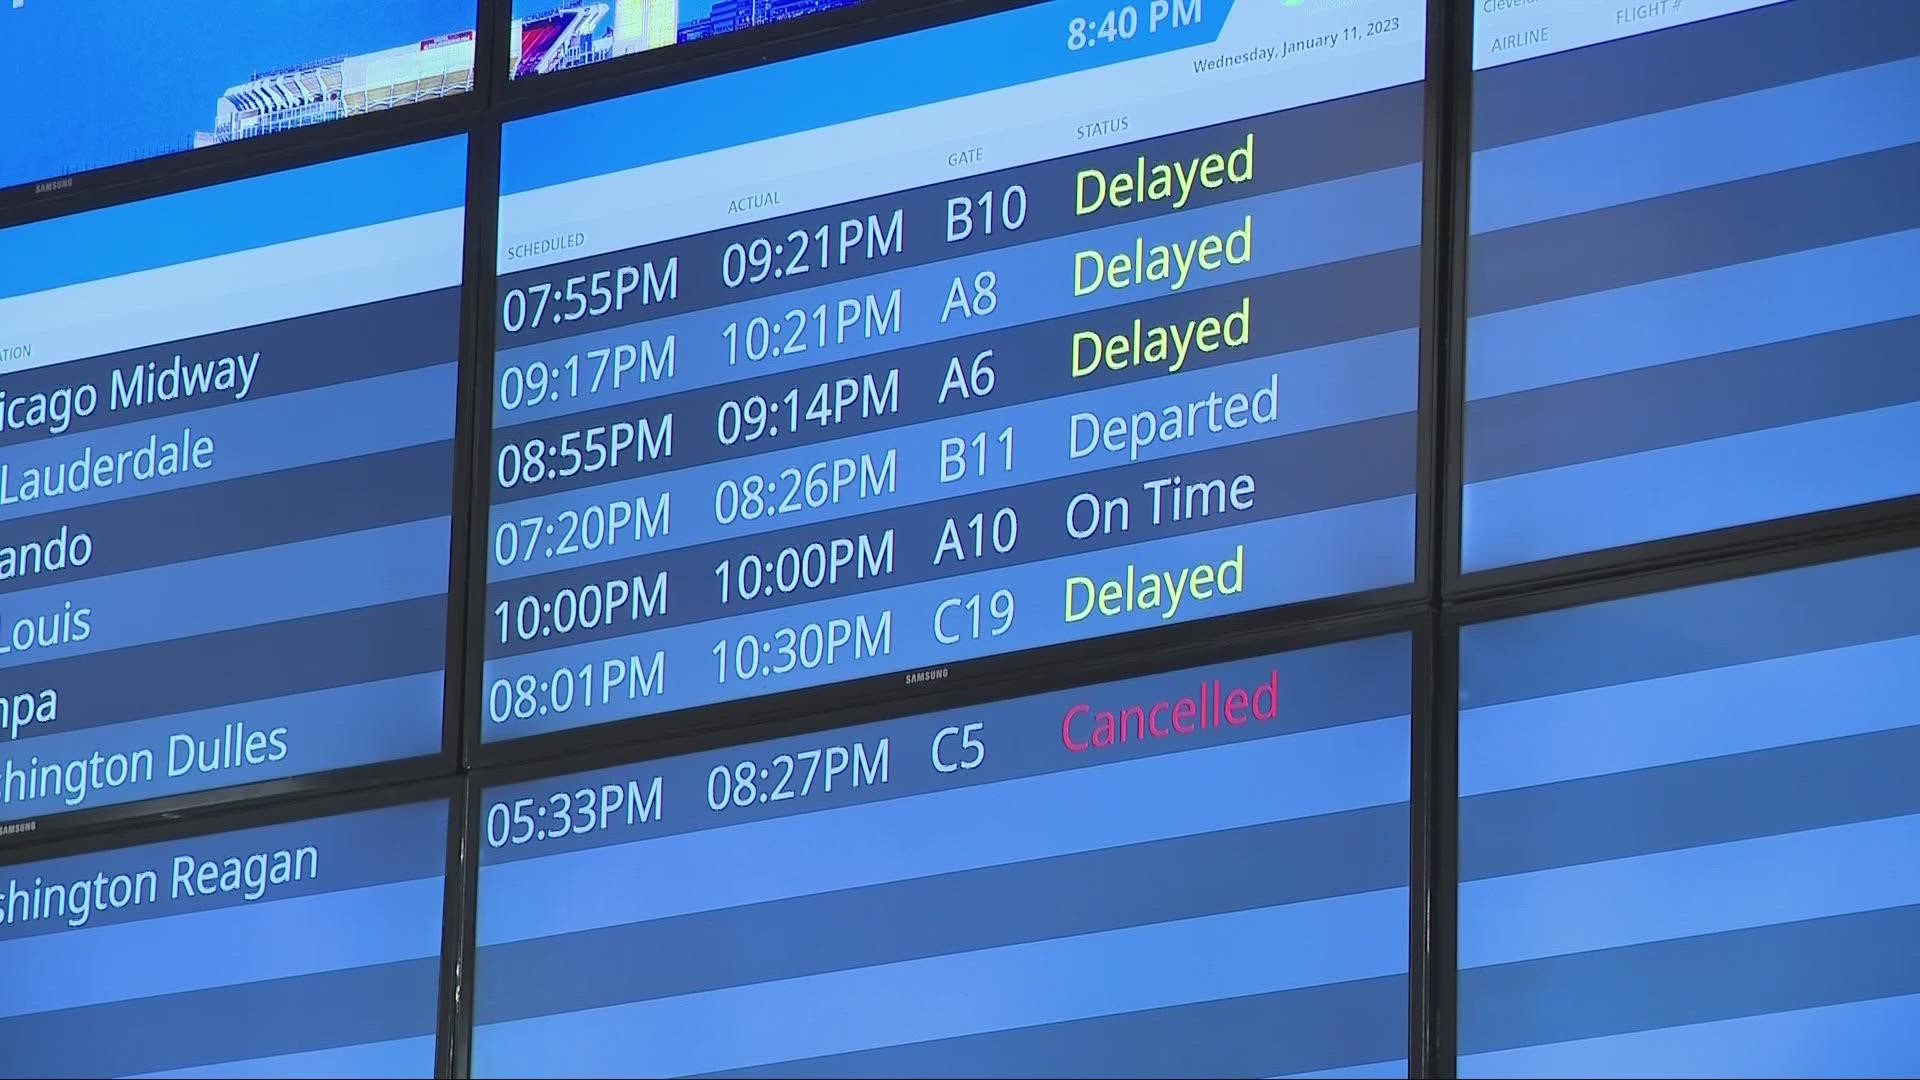 The FAA says the outage was due to a damaged database file, adding that there is no evidence of a cyber attack.